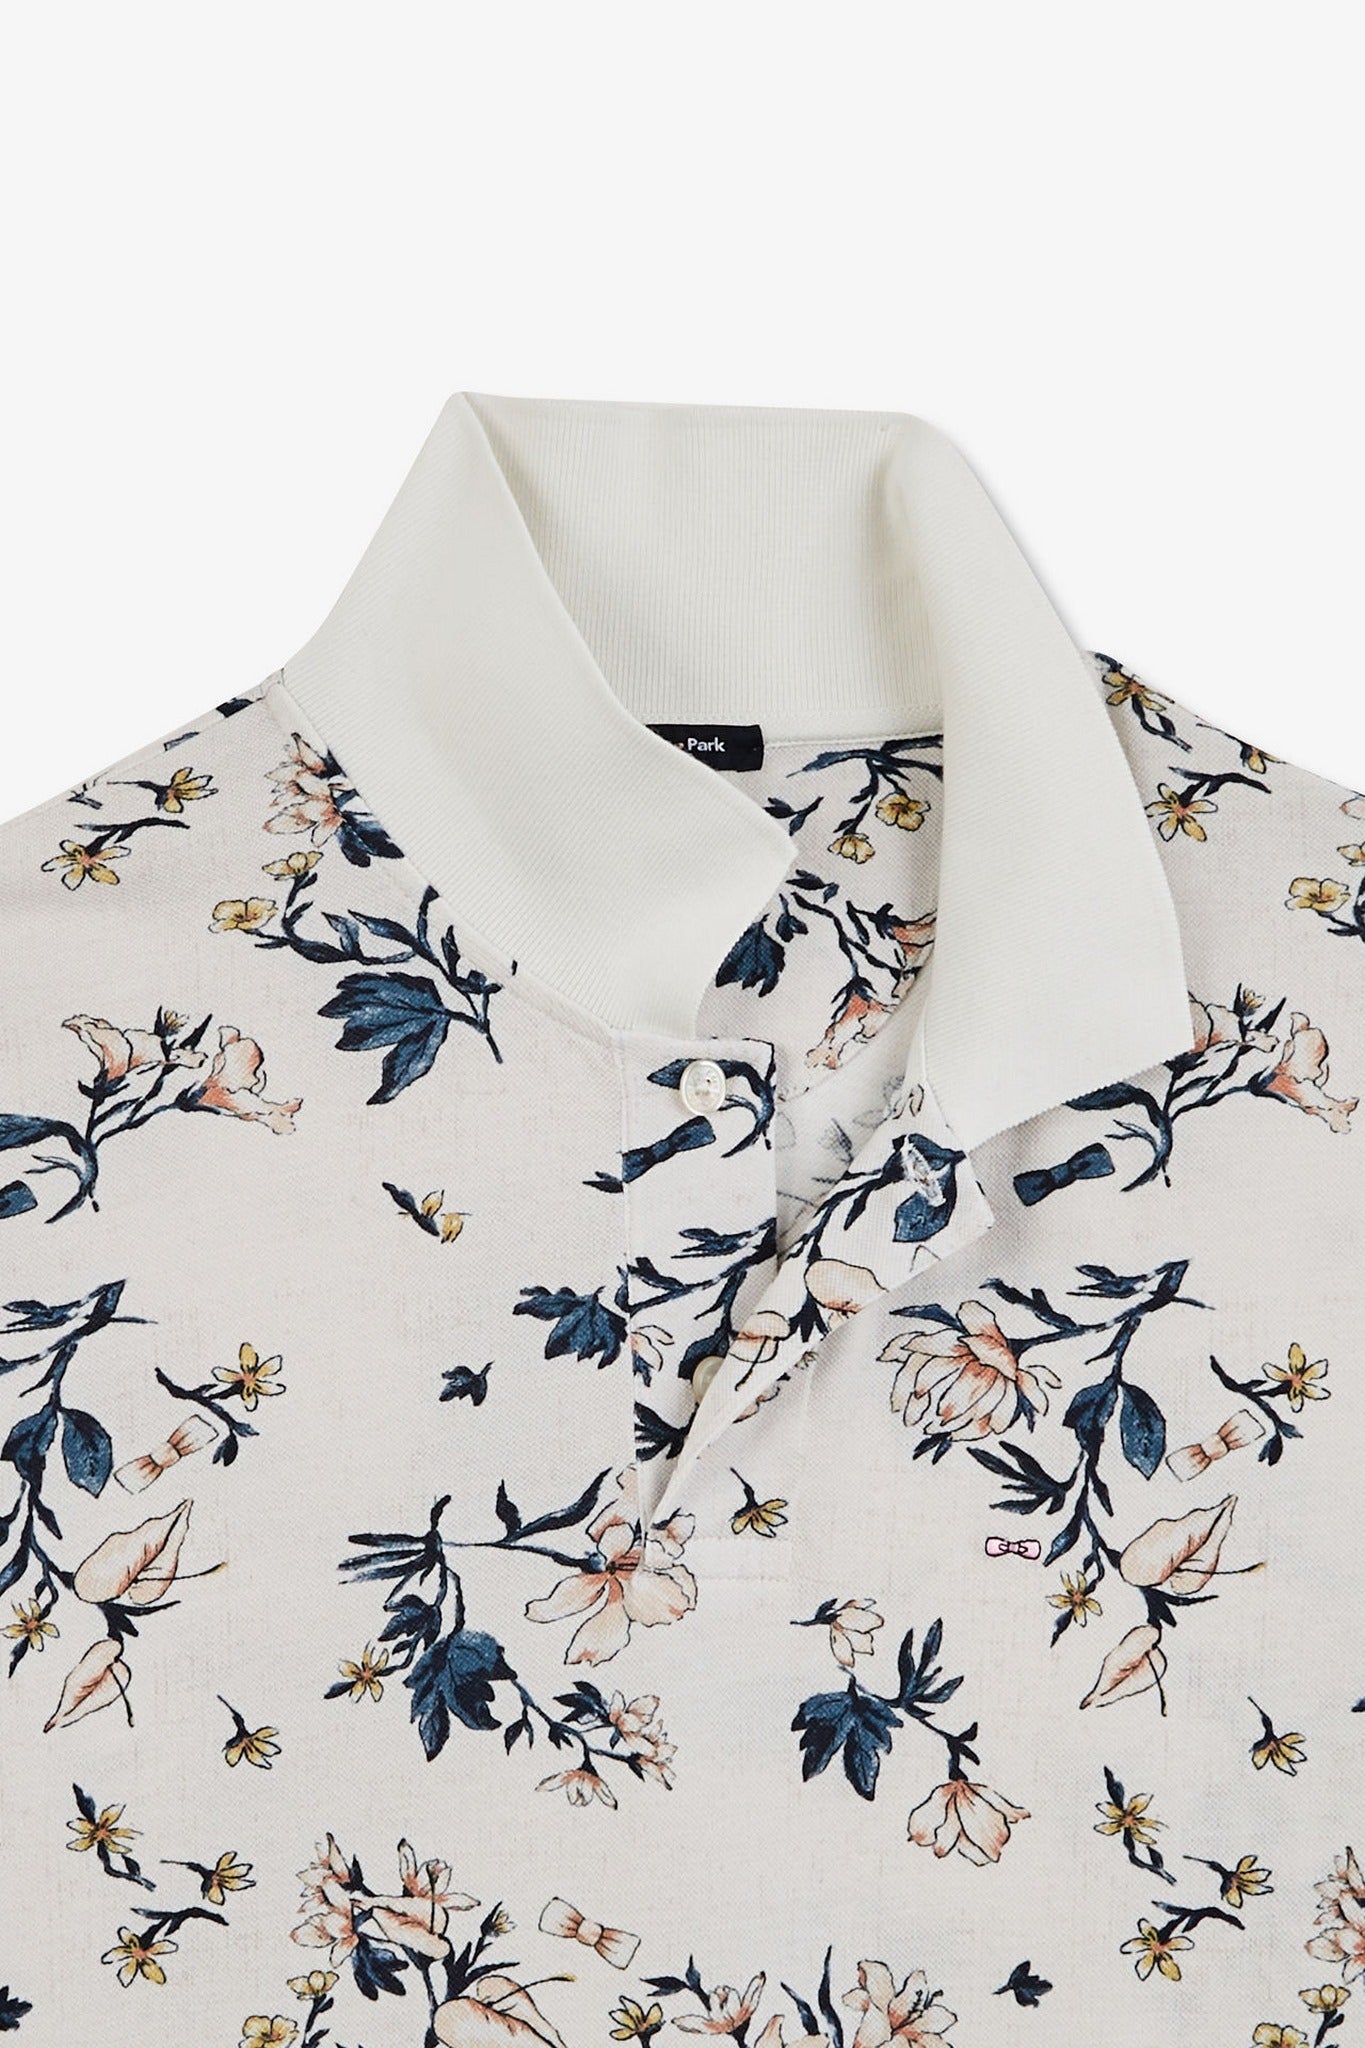 White polo shirt with an exclusive floral print - Image 8